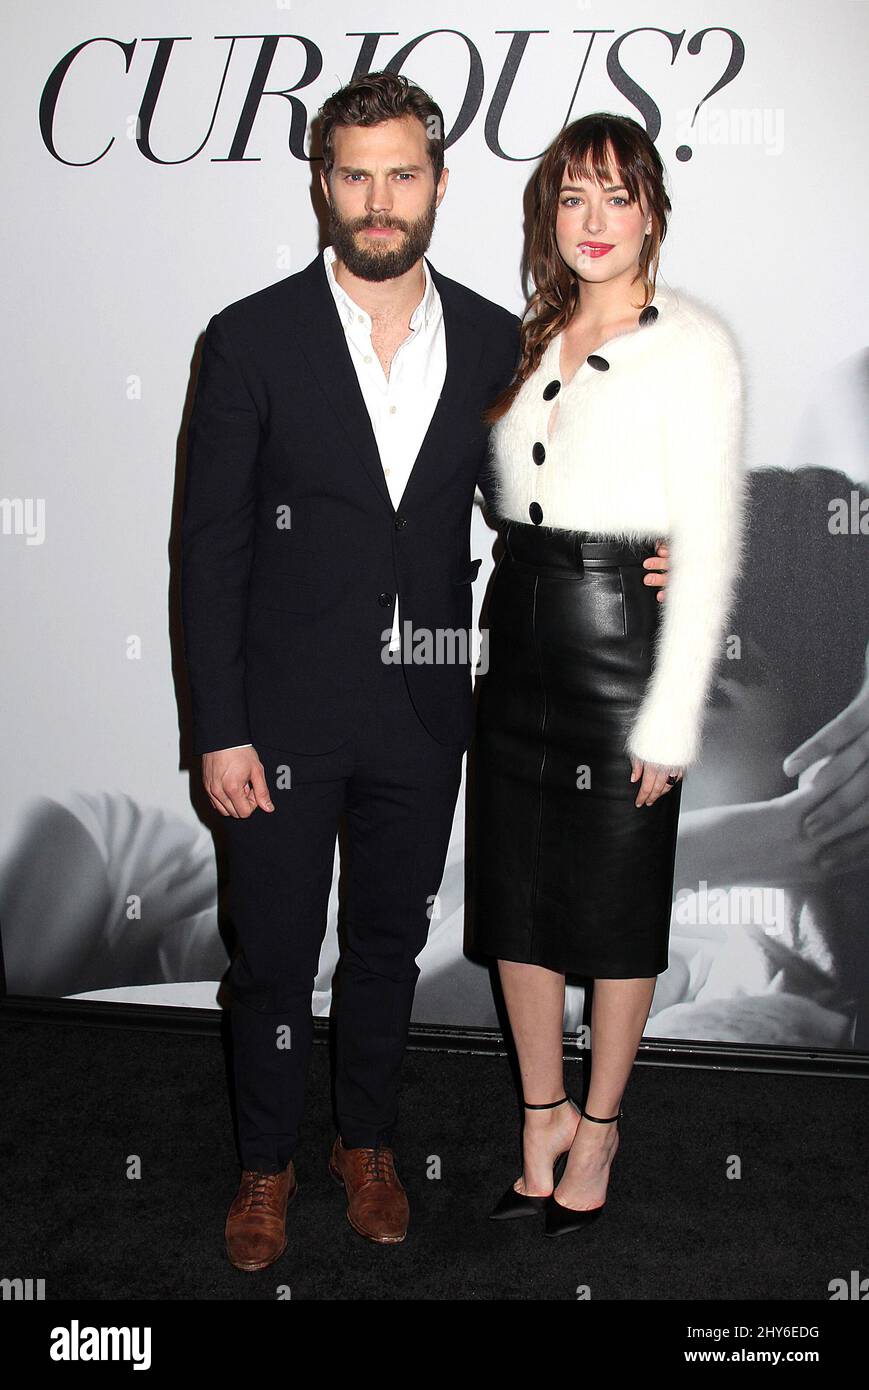 Jamie Dornan and Dakota Johnson attending the premiere of Fifty Shades of Grey in New York. Stock Photo